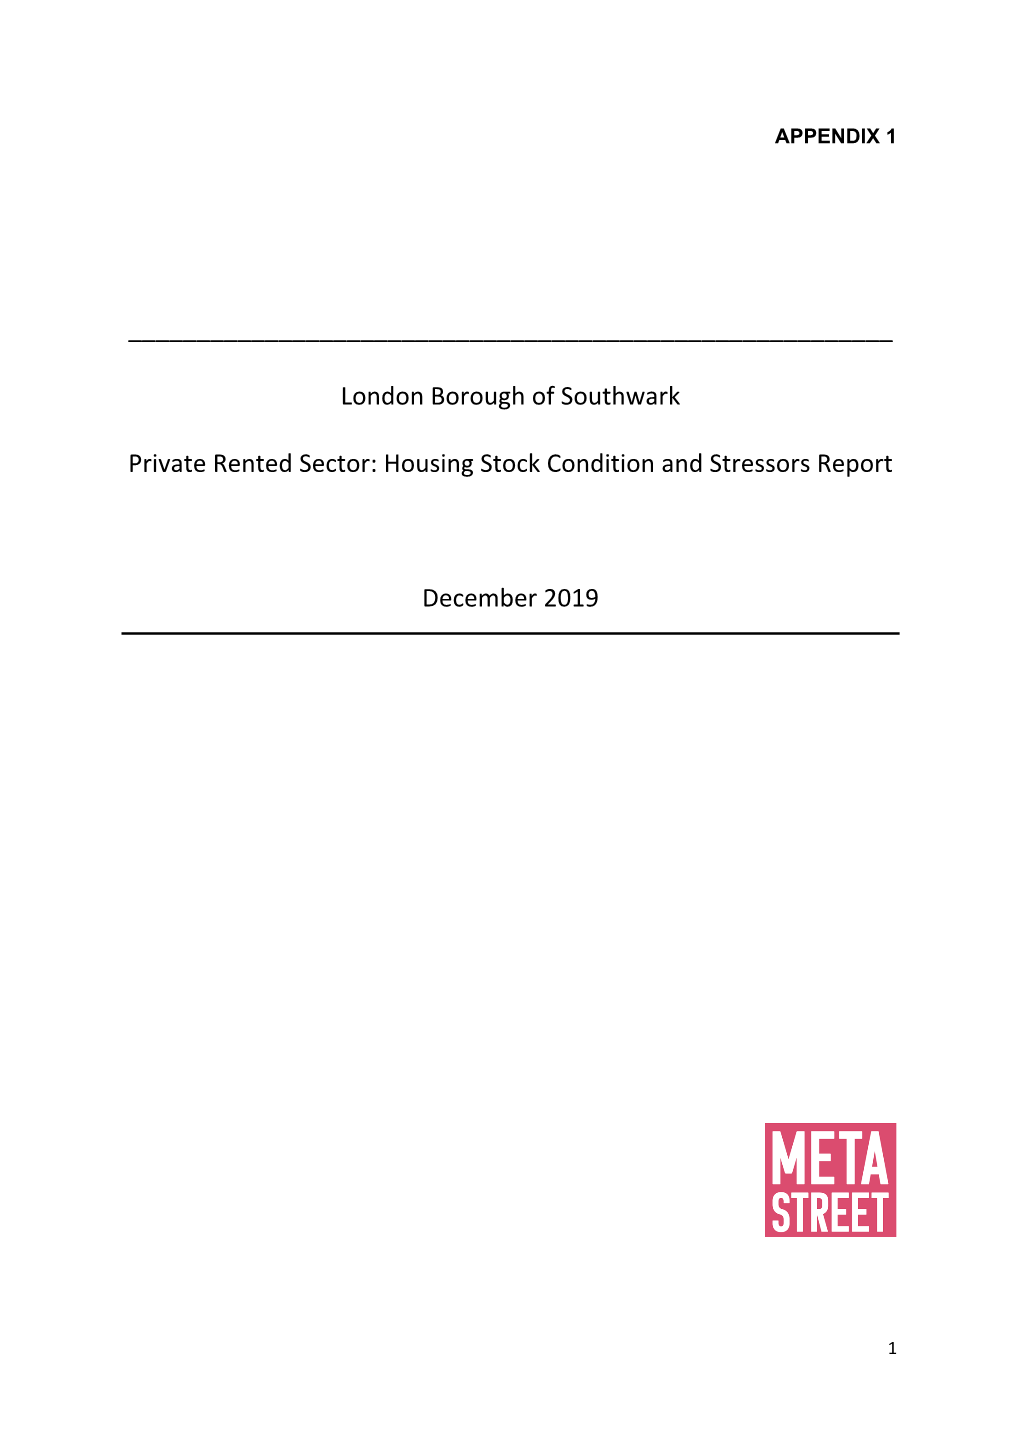 London Borough of Southwark Private Rented Sector